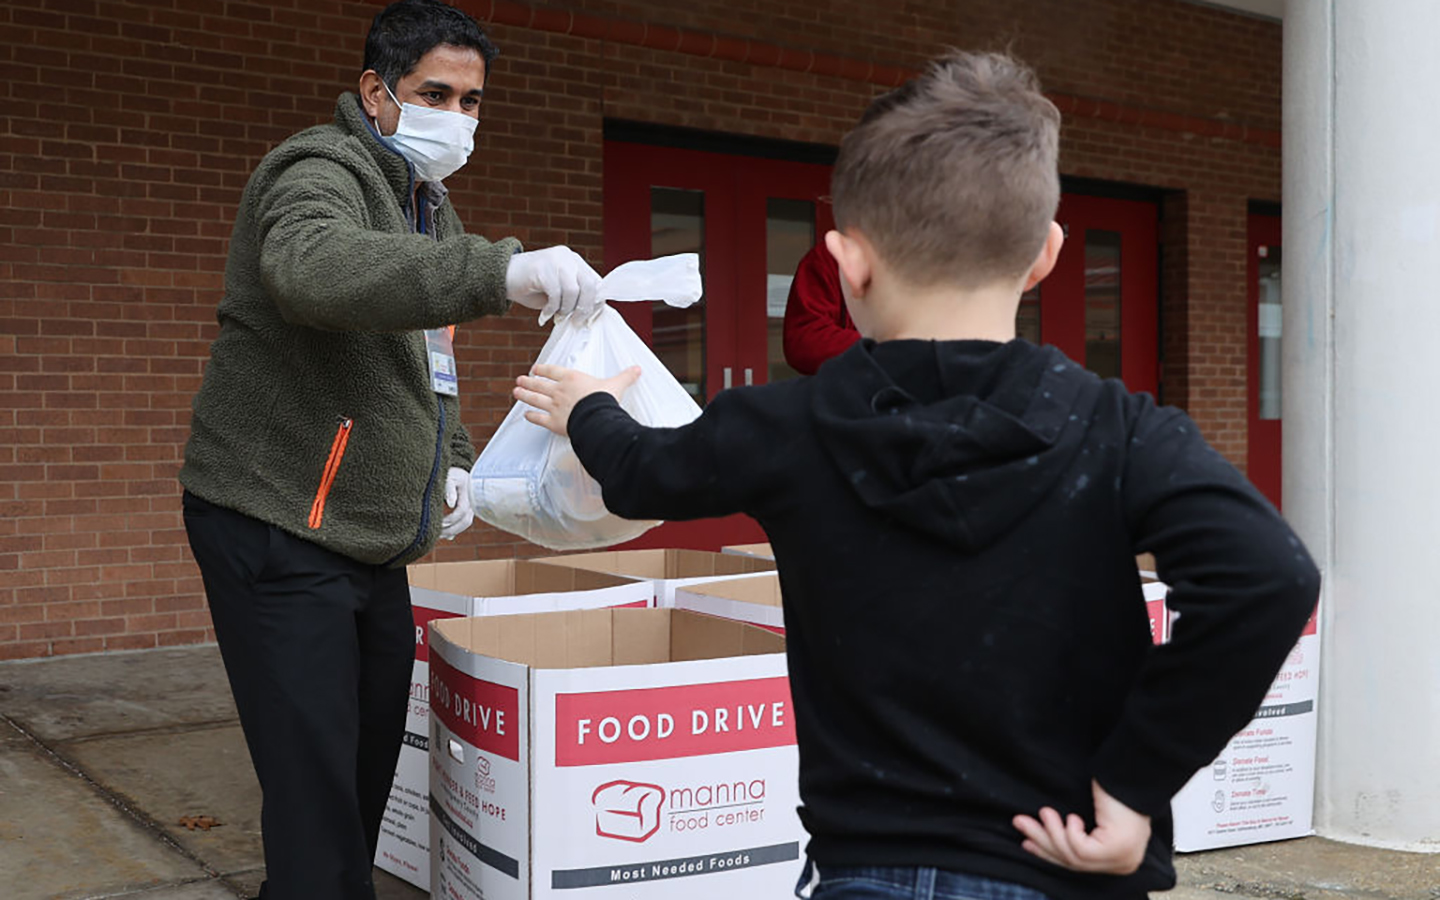 A young child collects a bag of food at a food drive